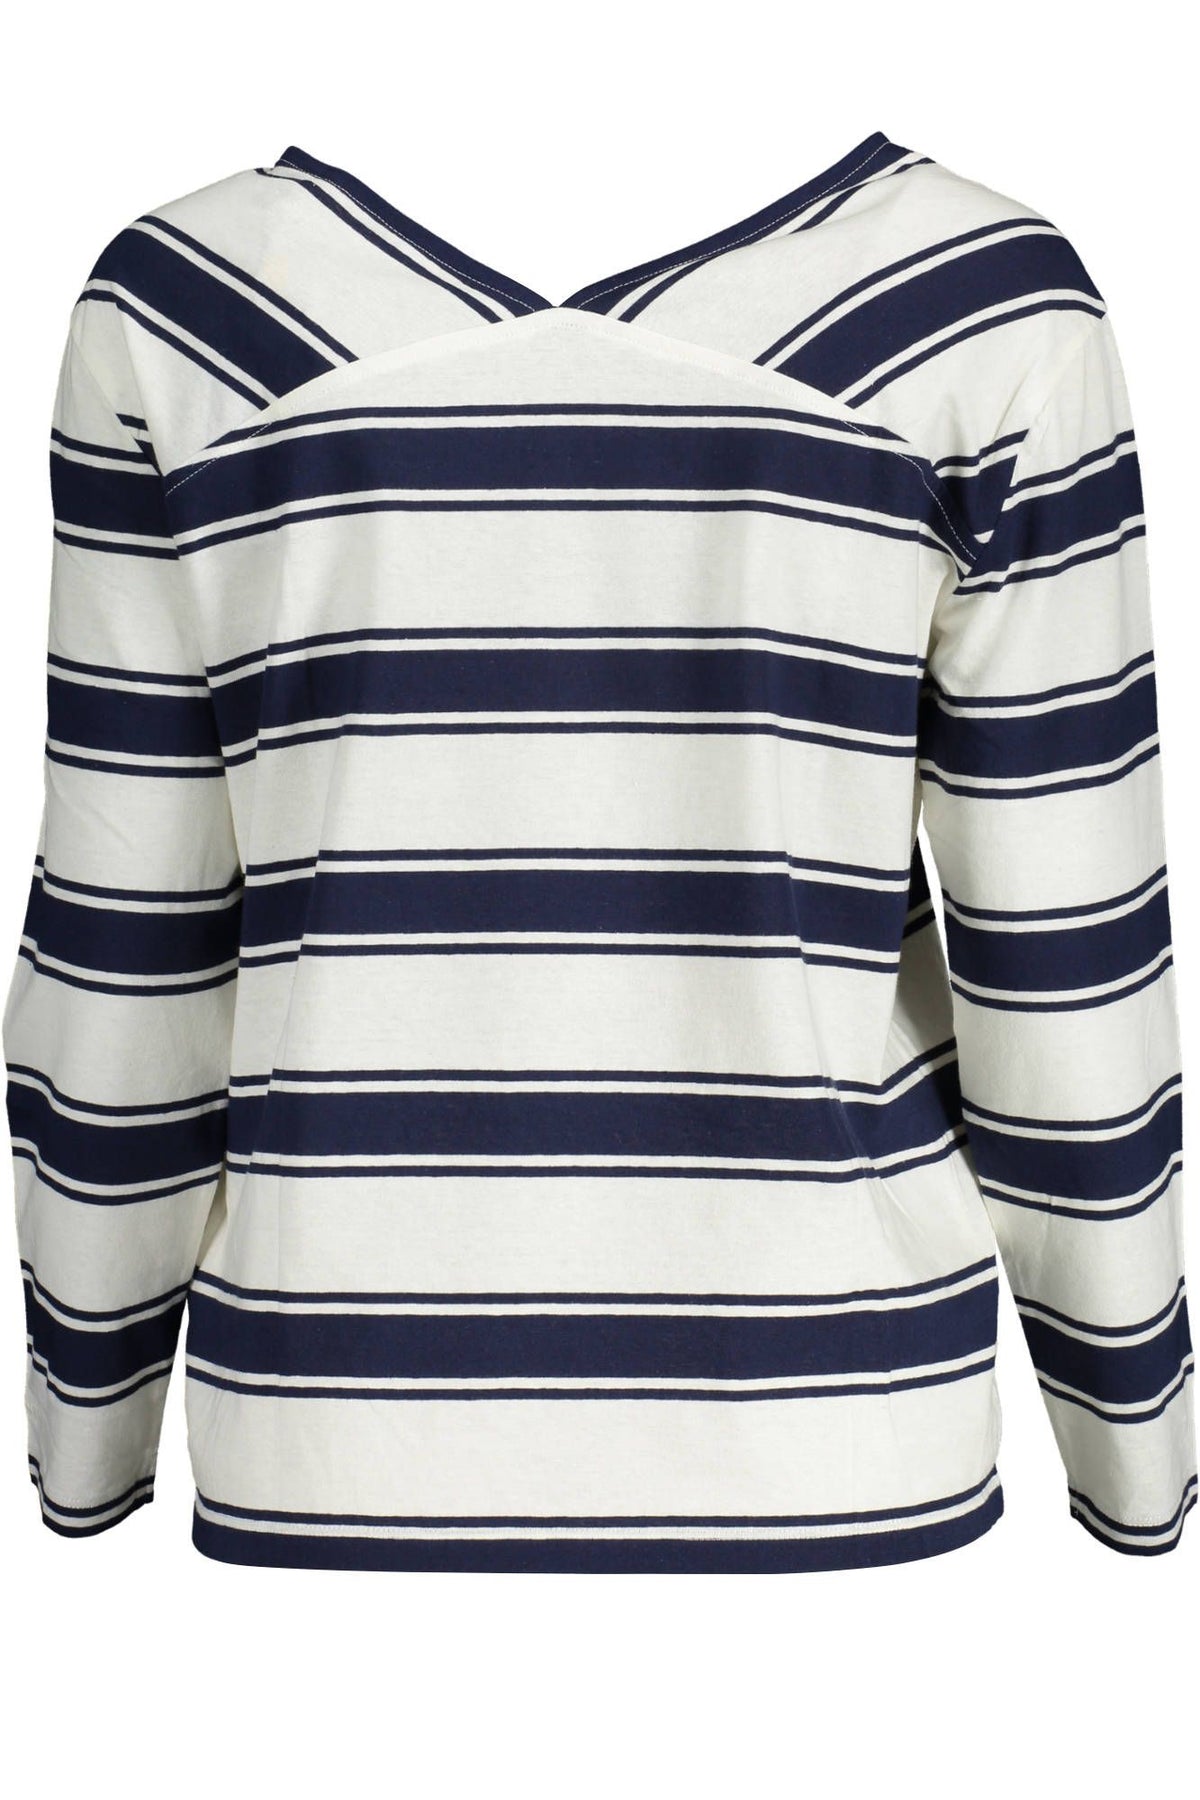 Gant Chic Long-Sleeved White Cotton Tee with V-Neck Detail